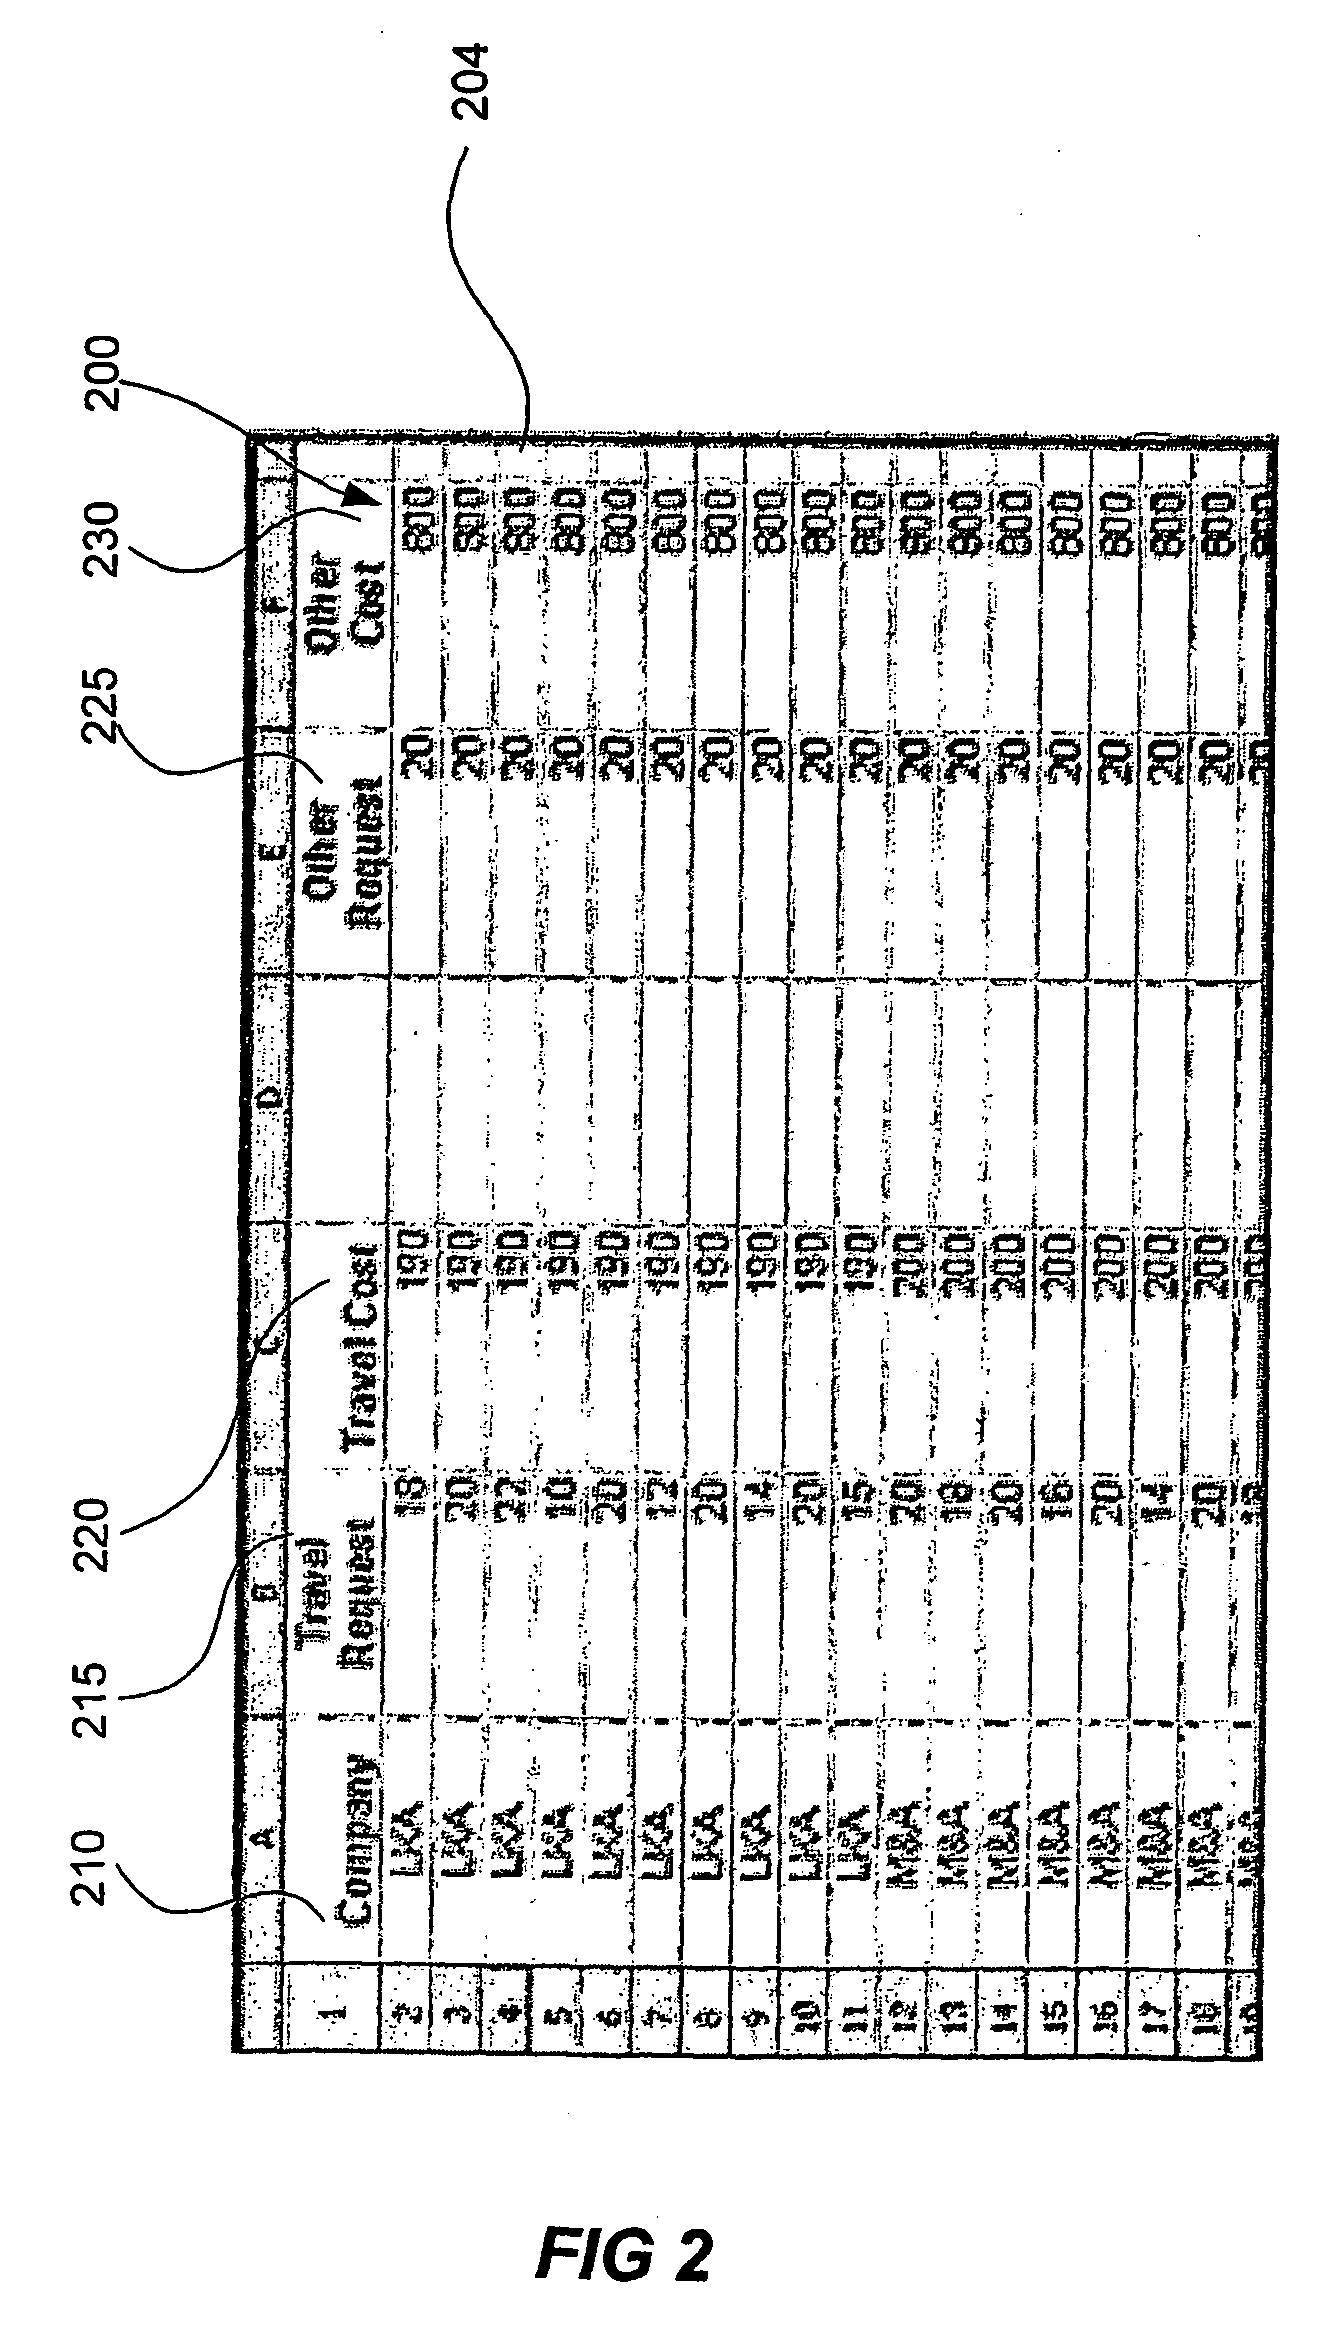 System and method for selecting a service provider